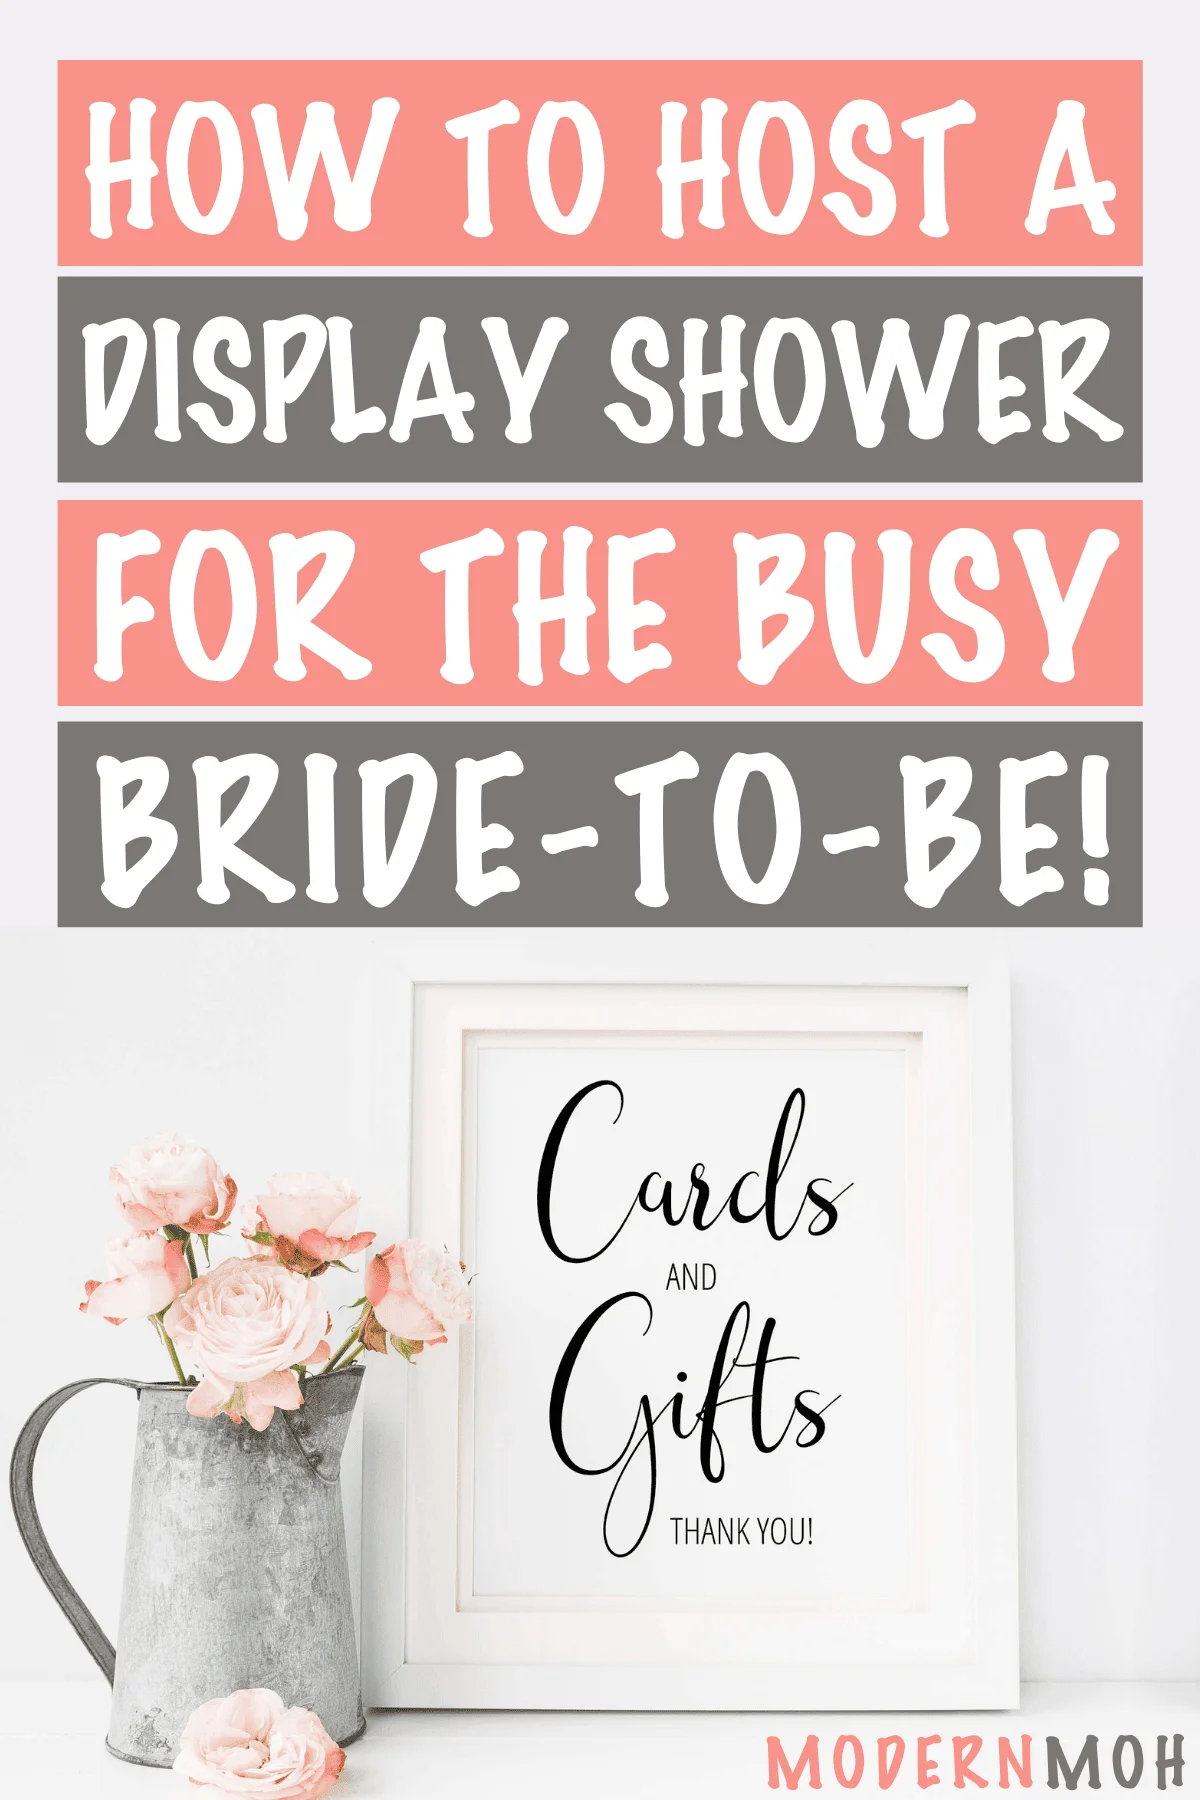 How to Host a Display Bridal Shower